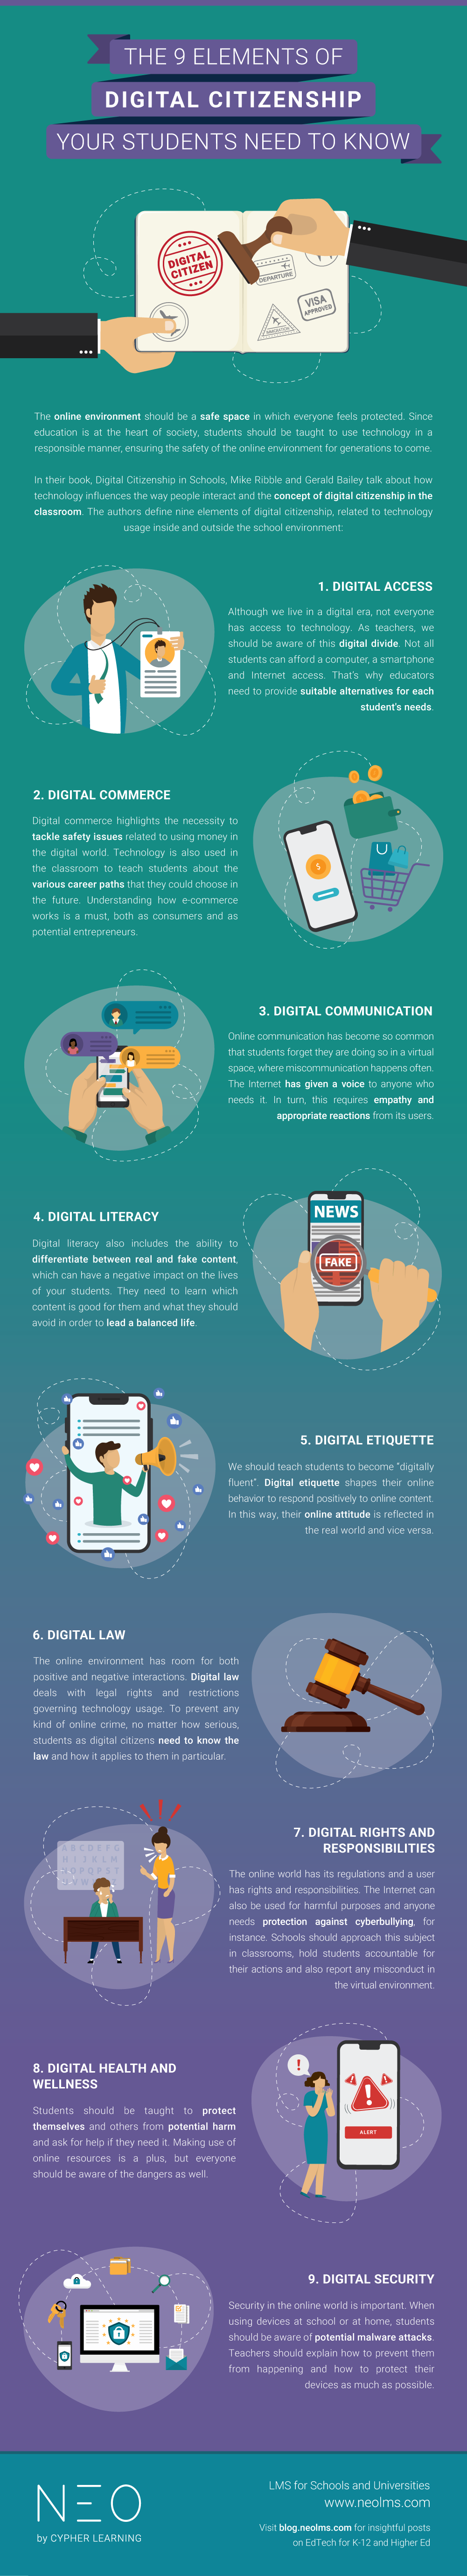 The 9 elements of digital citizenship your students need to know